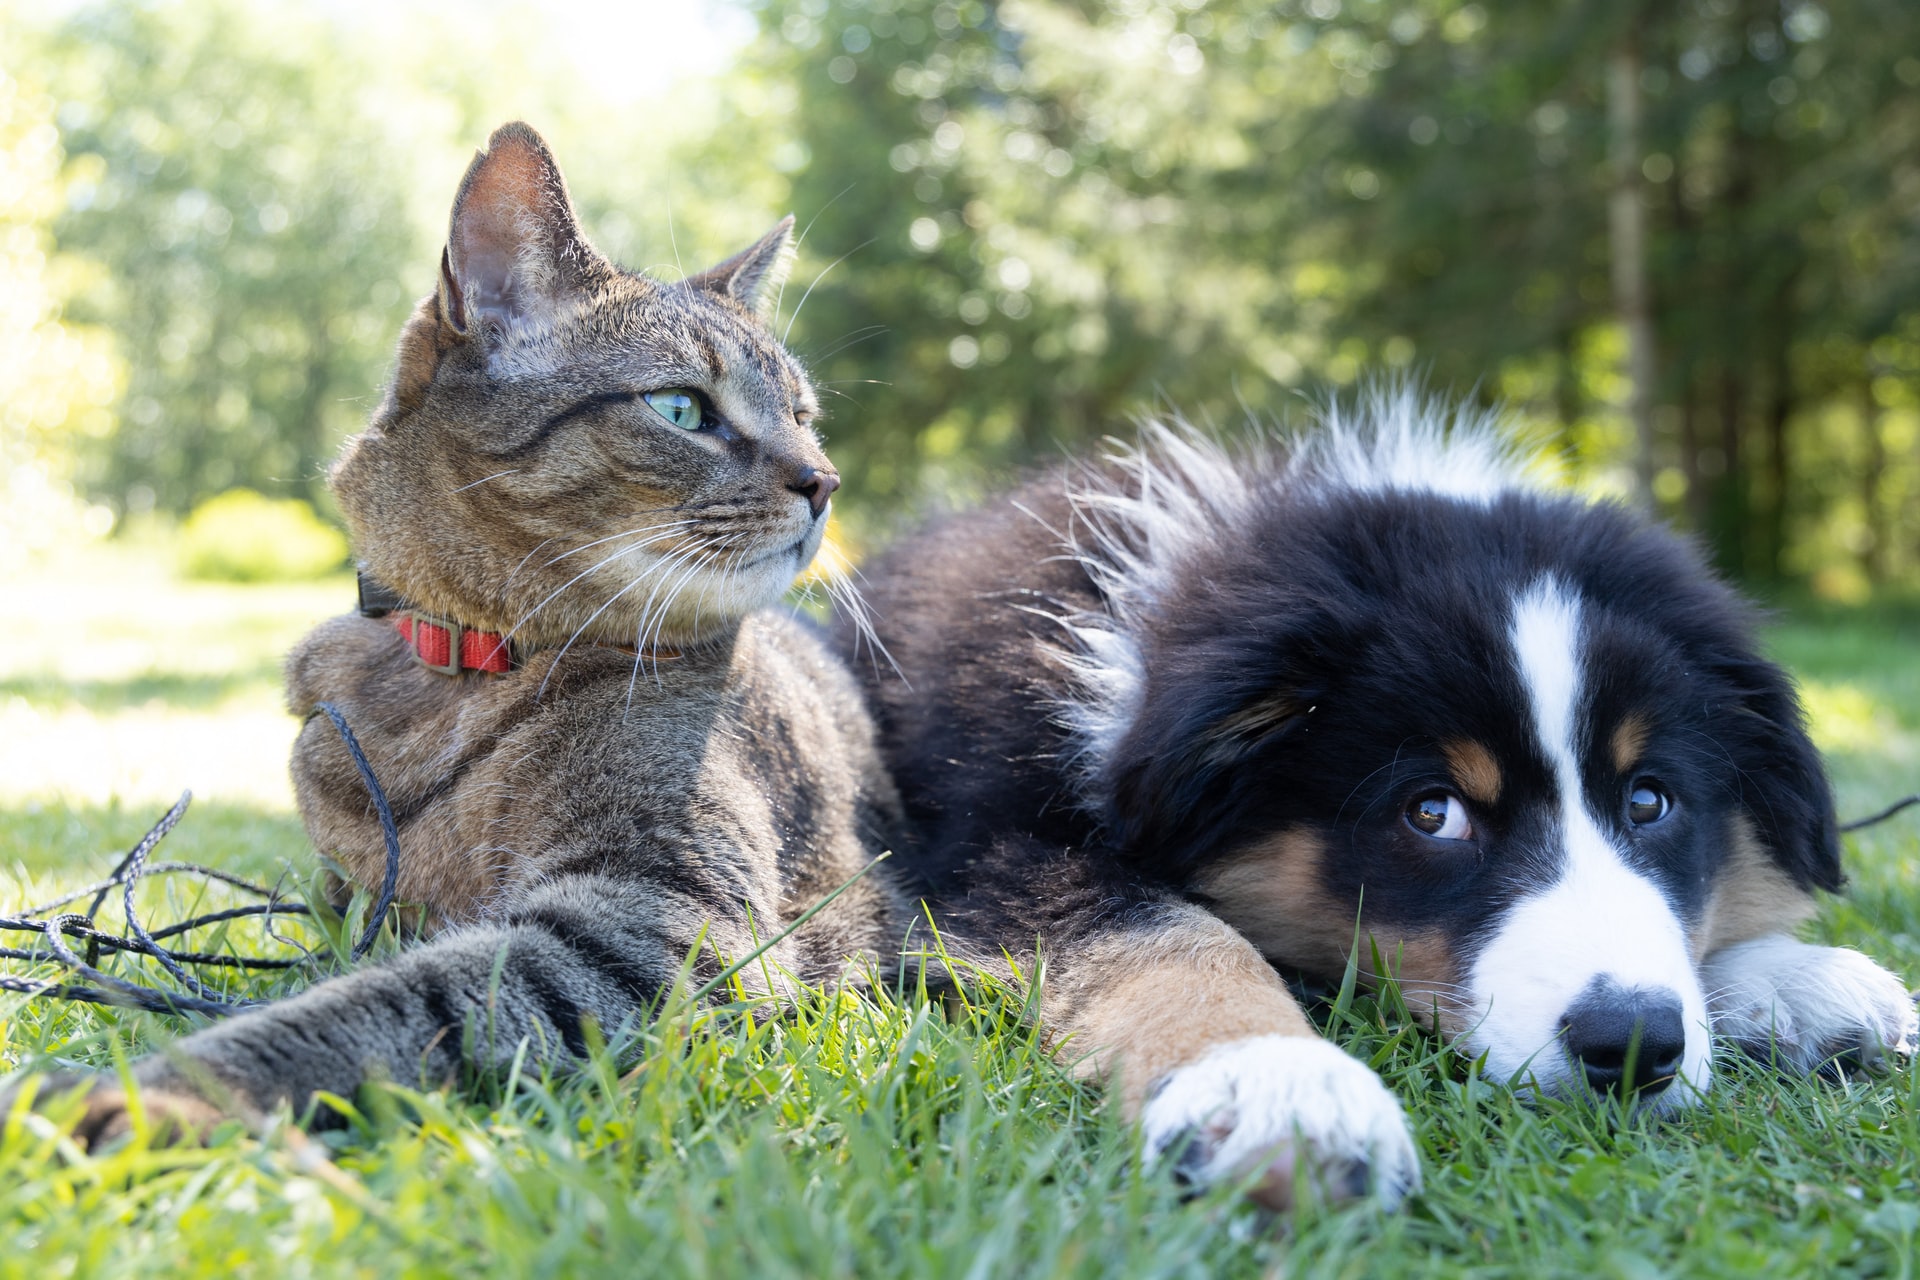 Dog and cat laying together outside in Hayesville, NC